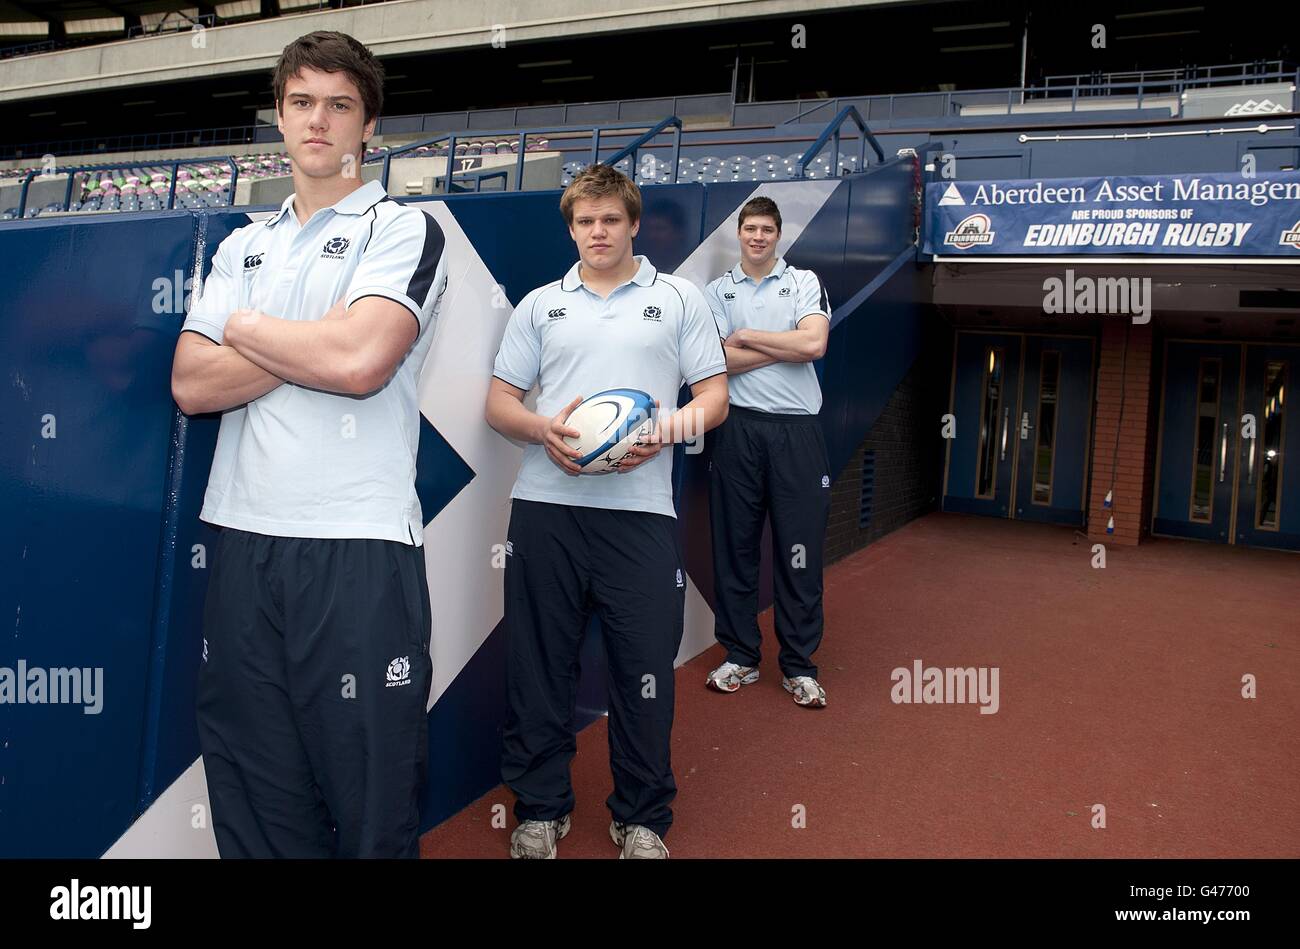 Recipients of the John McPhail scholarship (left to right) Harry Leonard (Edinburgh/Boroughmuir), George Turner (Stewart's Melville FP) and Grant Gilchrist (Edinburgh/Stirling County) during a media call at Murrayfield, Edinburgh. Stock Photo